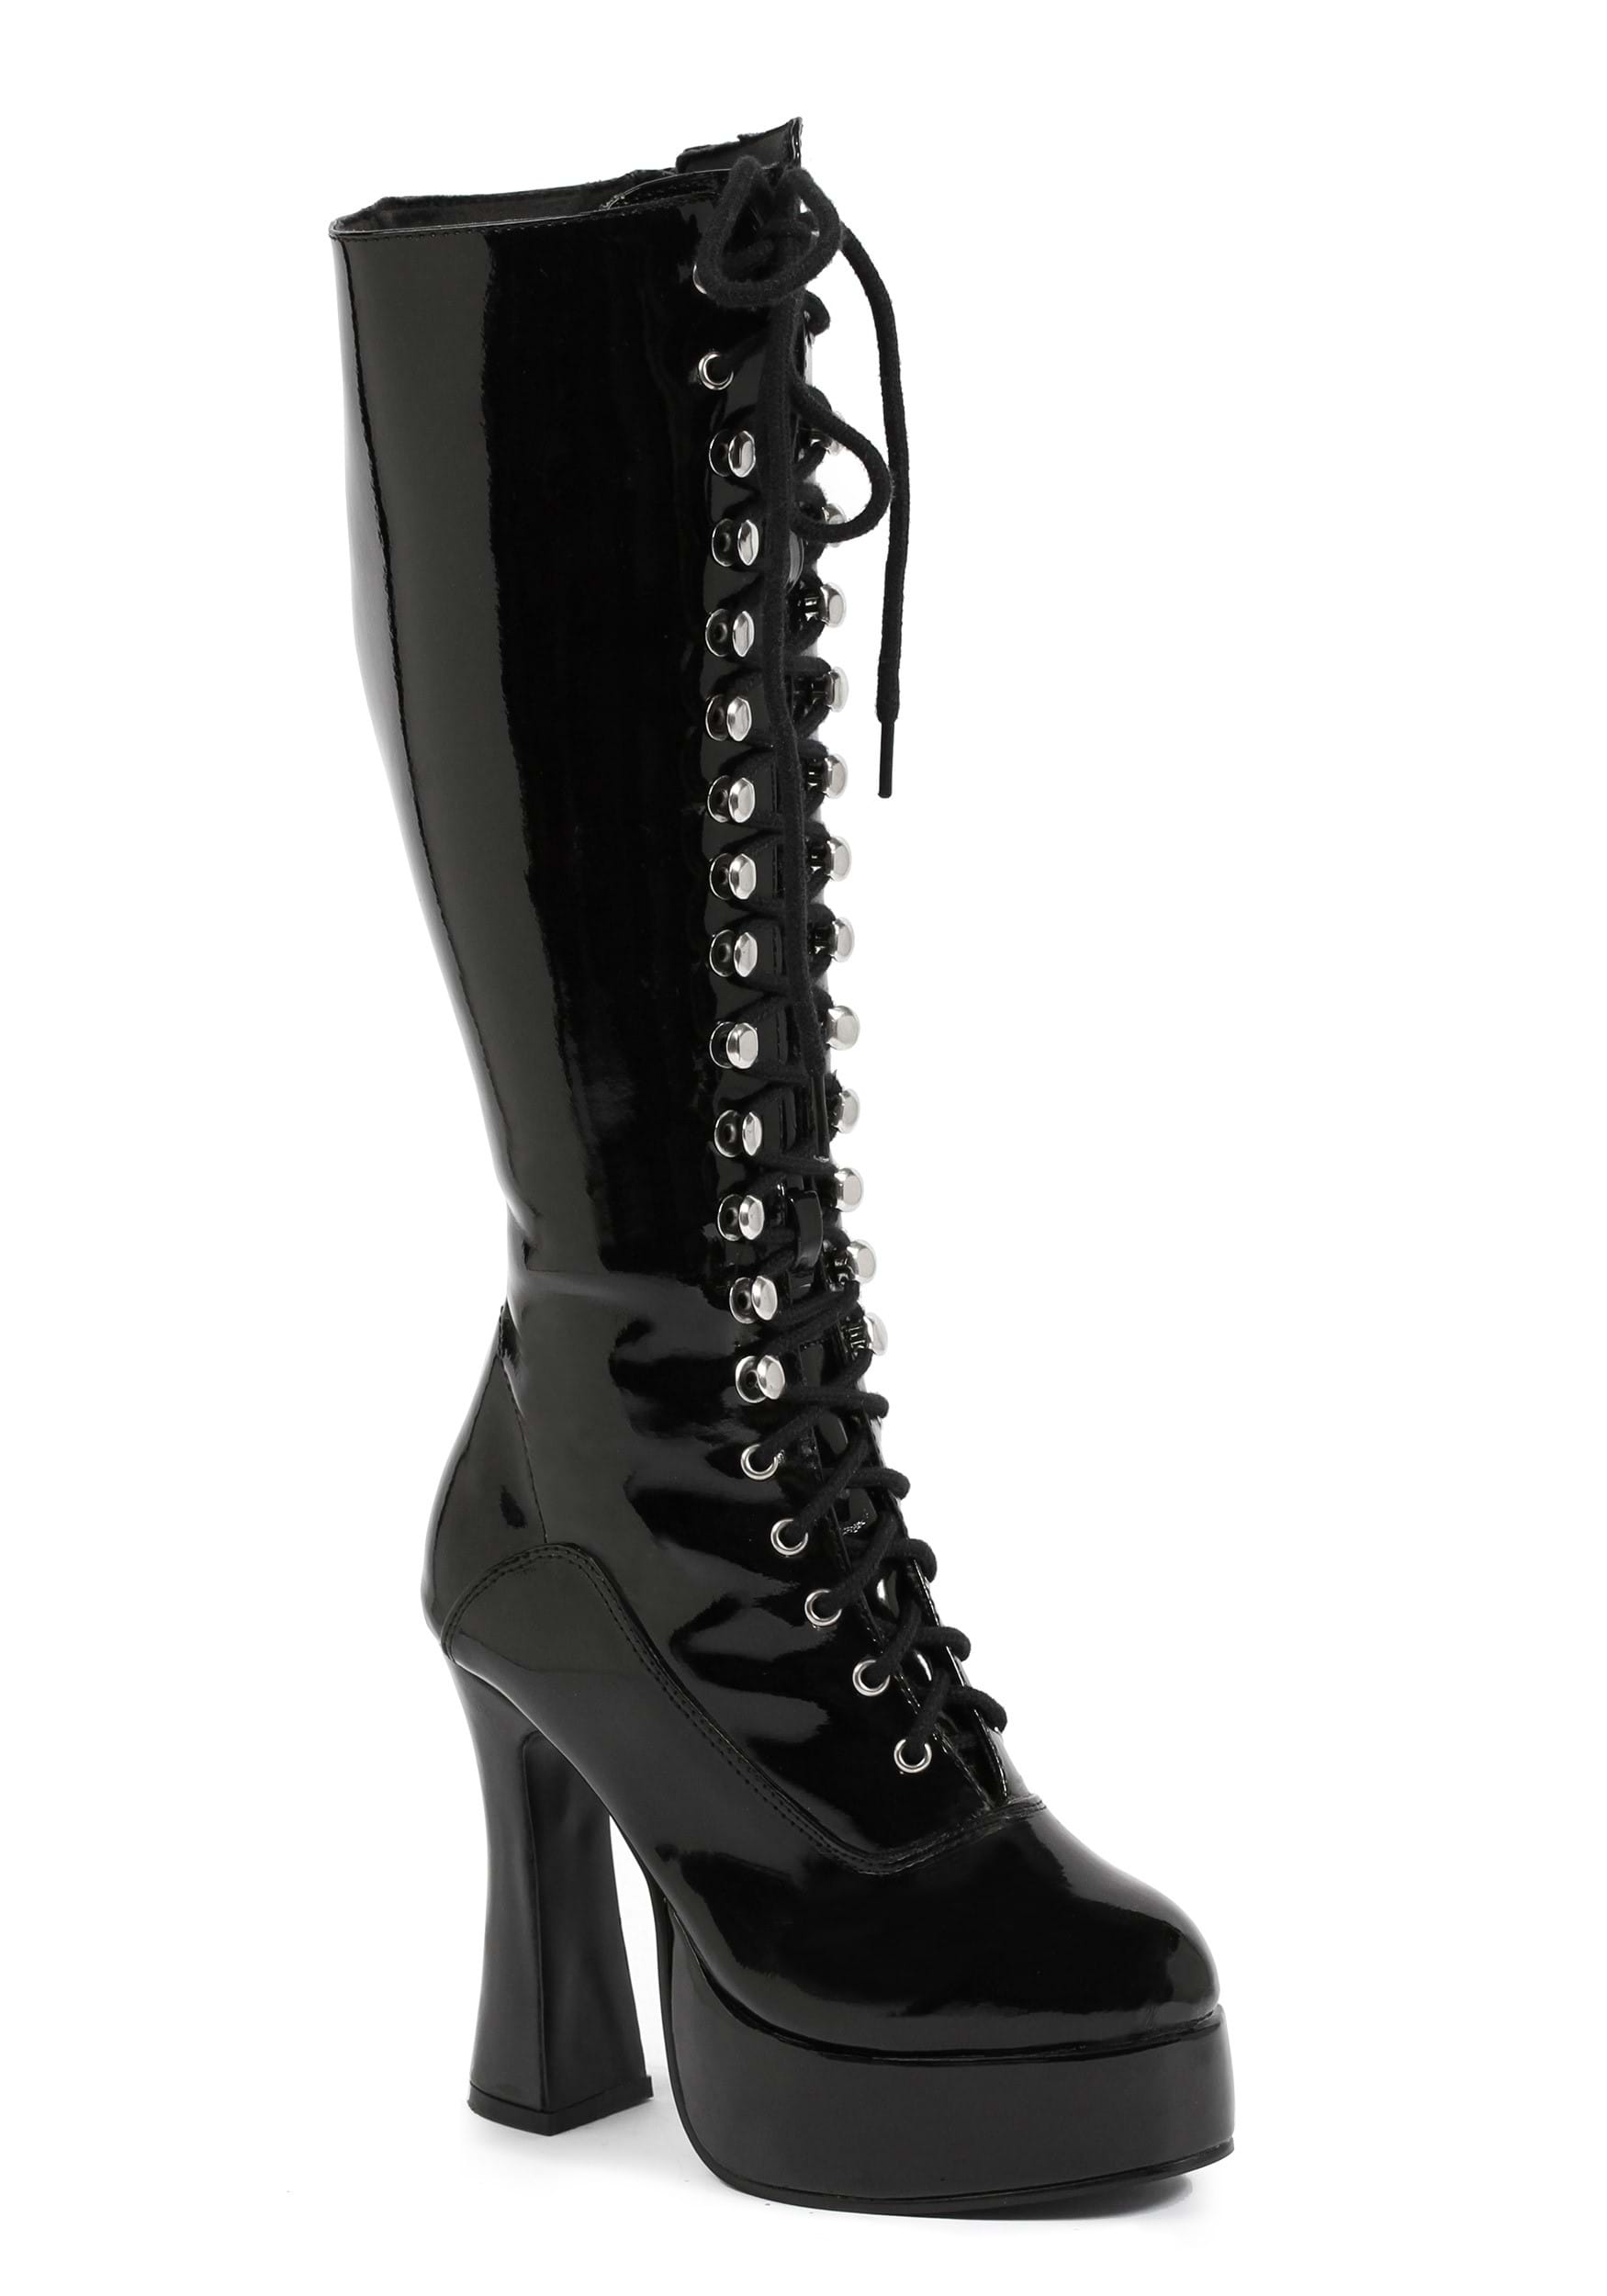 Black Lace Knee High Women's Boots